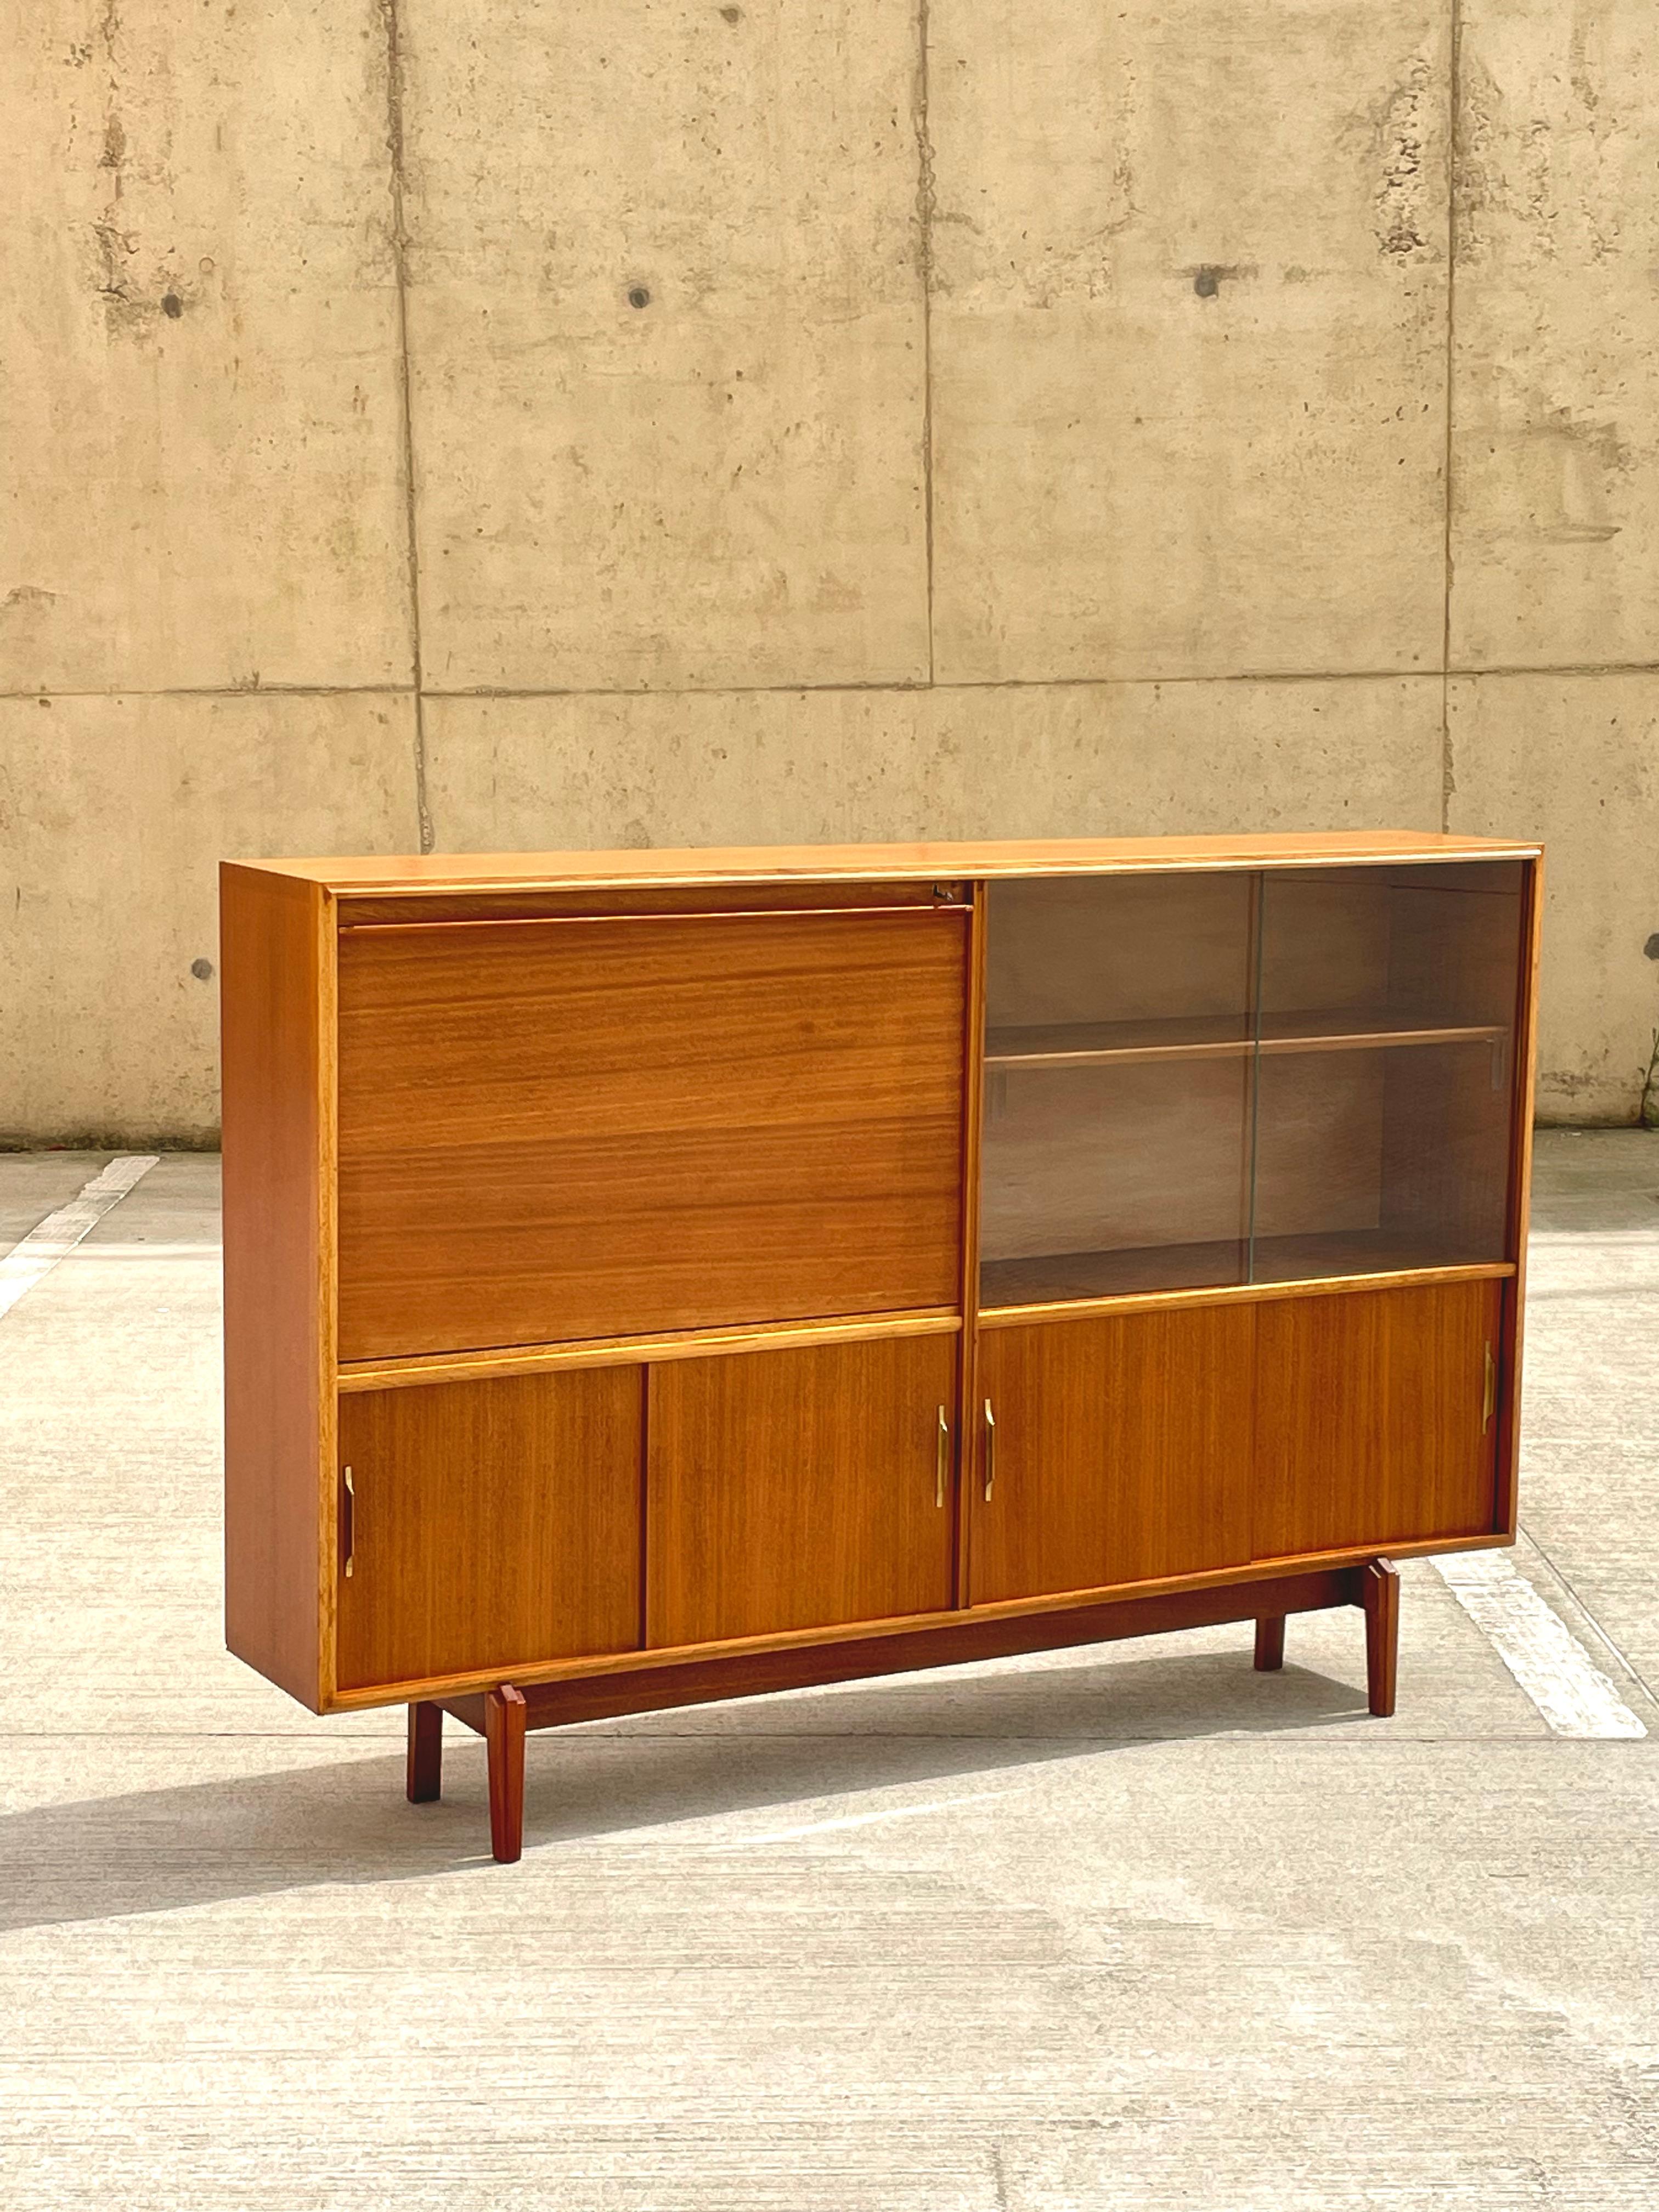 This is a beautiful vintage drinks cabinet sideboard from the 1960s. The Mid-century modern cabinet was designed by Robert Heritage as part of the Multi-Width series for Beaver and Tapley. Beaver and Tapley was a mid-century British furniture